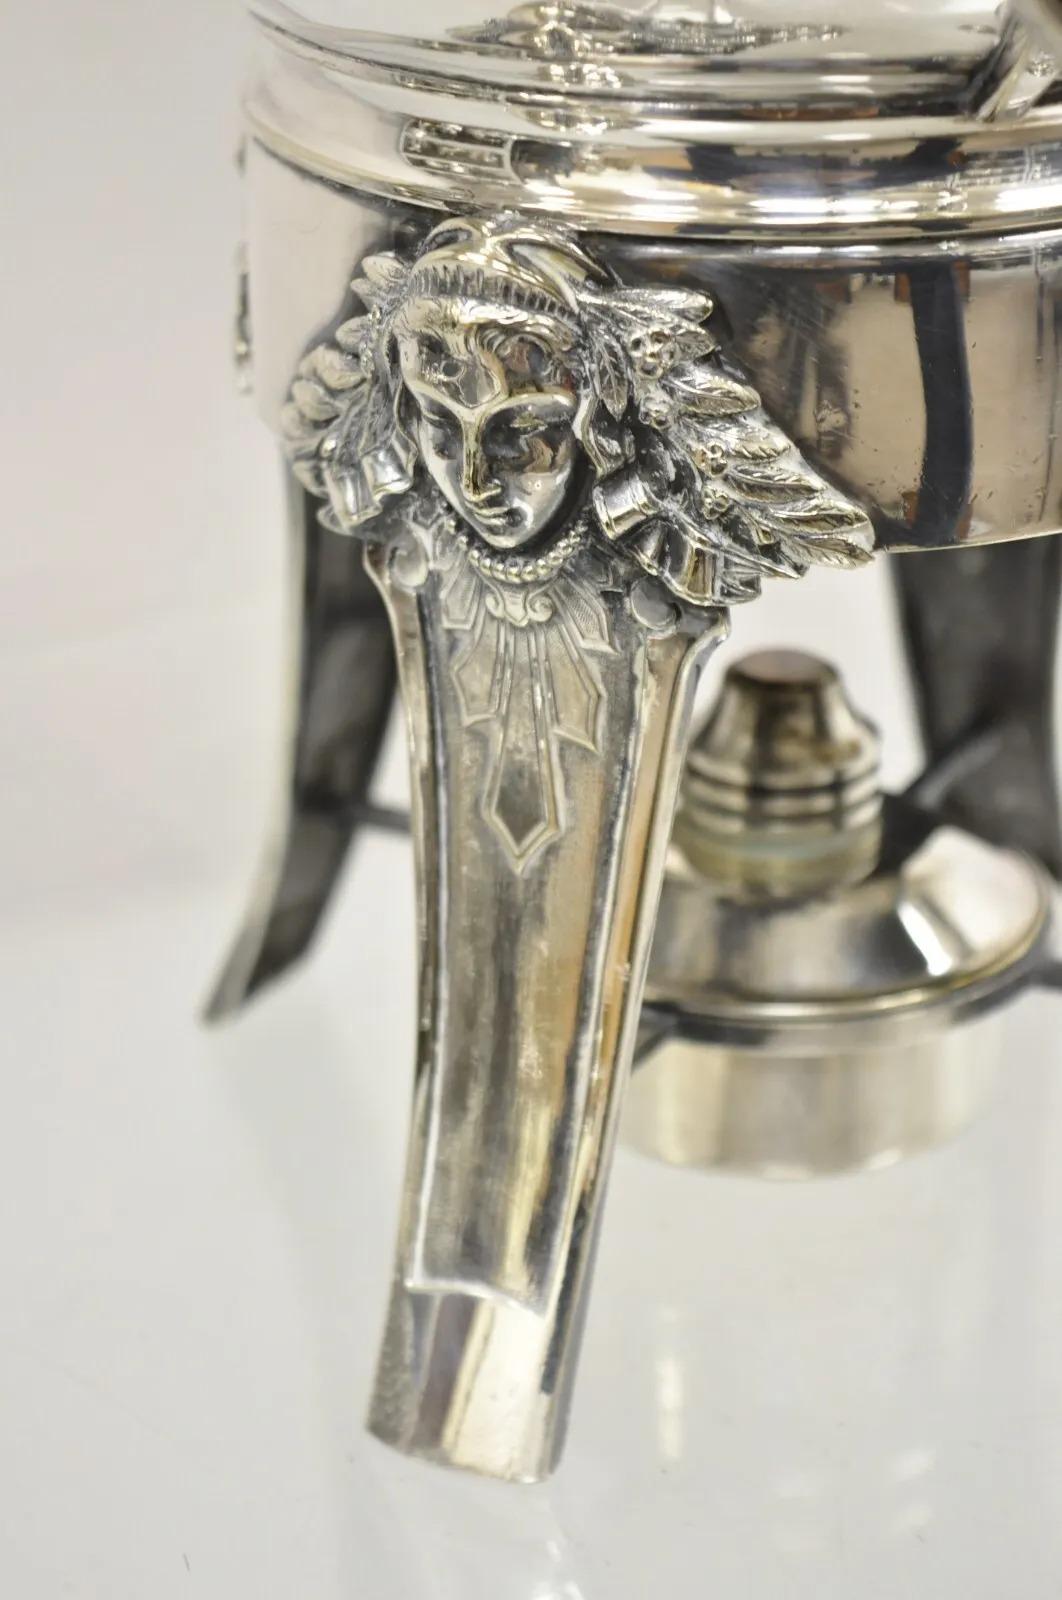 Gorham Co Figural Silver Plated Art Deco Ball Form Samovar Hot Water Dispenser In Good Condition For Sale In Philadelphia, PA